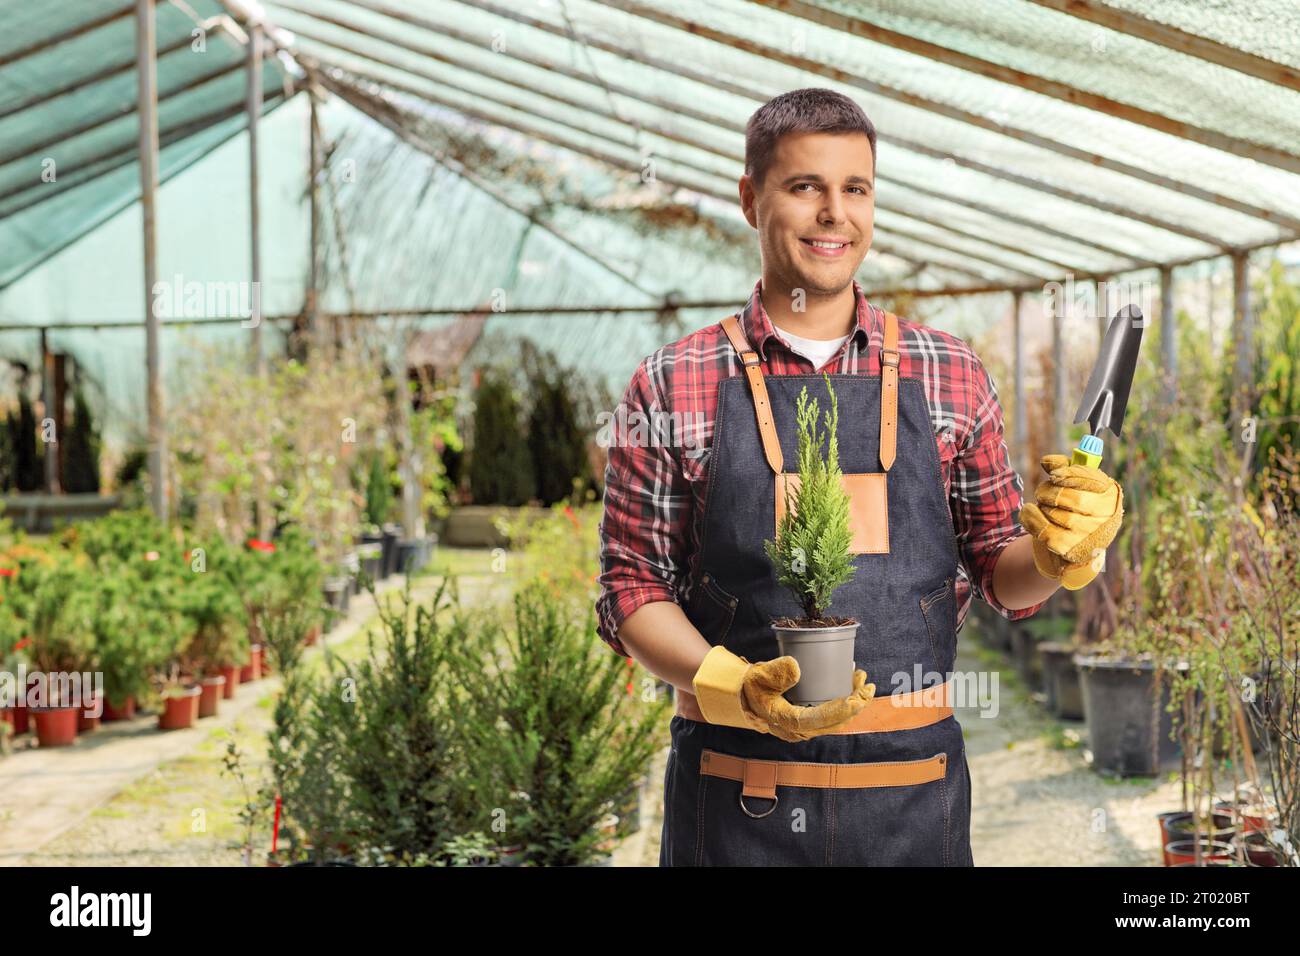 Gardener with a small tree in a pot and a spade standing inside a greenhouse Stock Photo